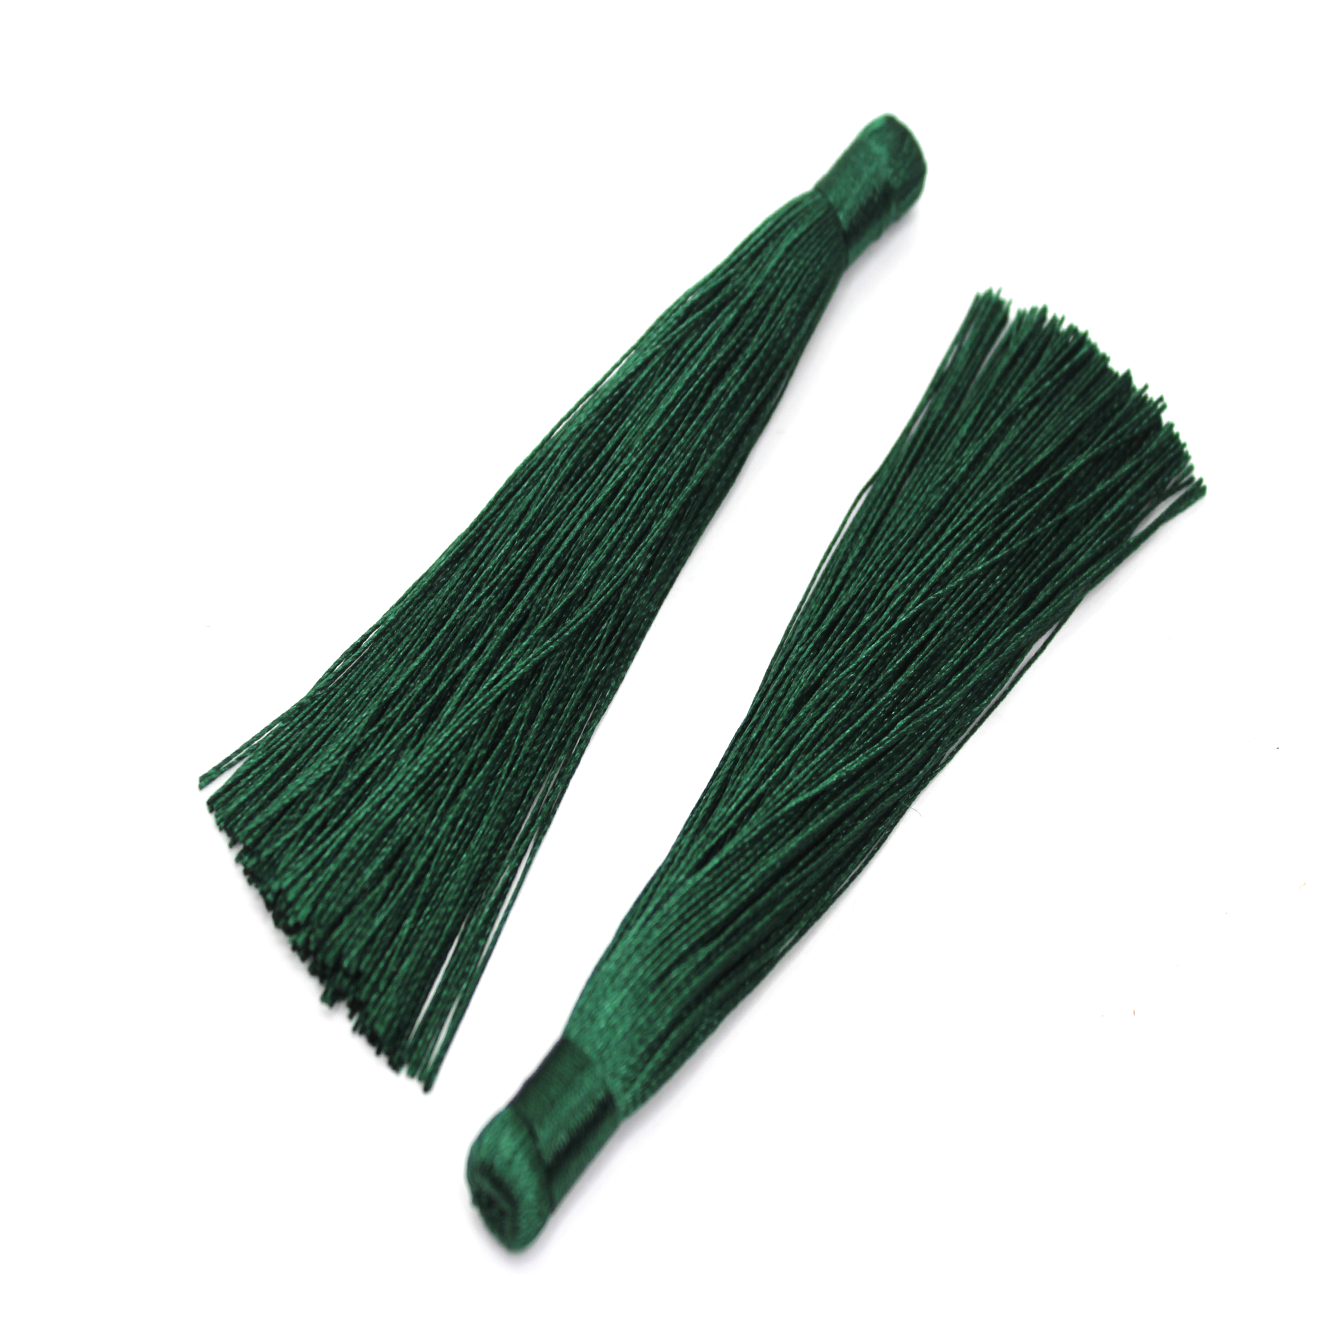 Tassels, Silk Thread, approx. 4.5 inch, 2pcs, Available in 7 colors